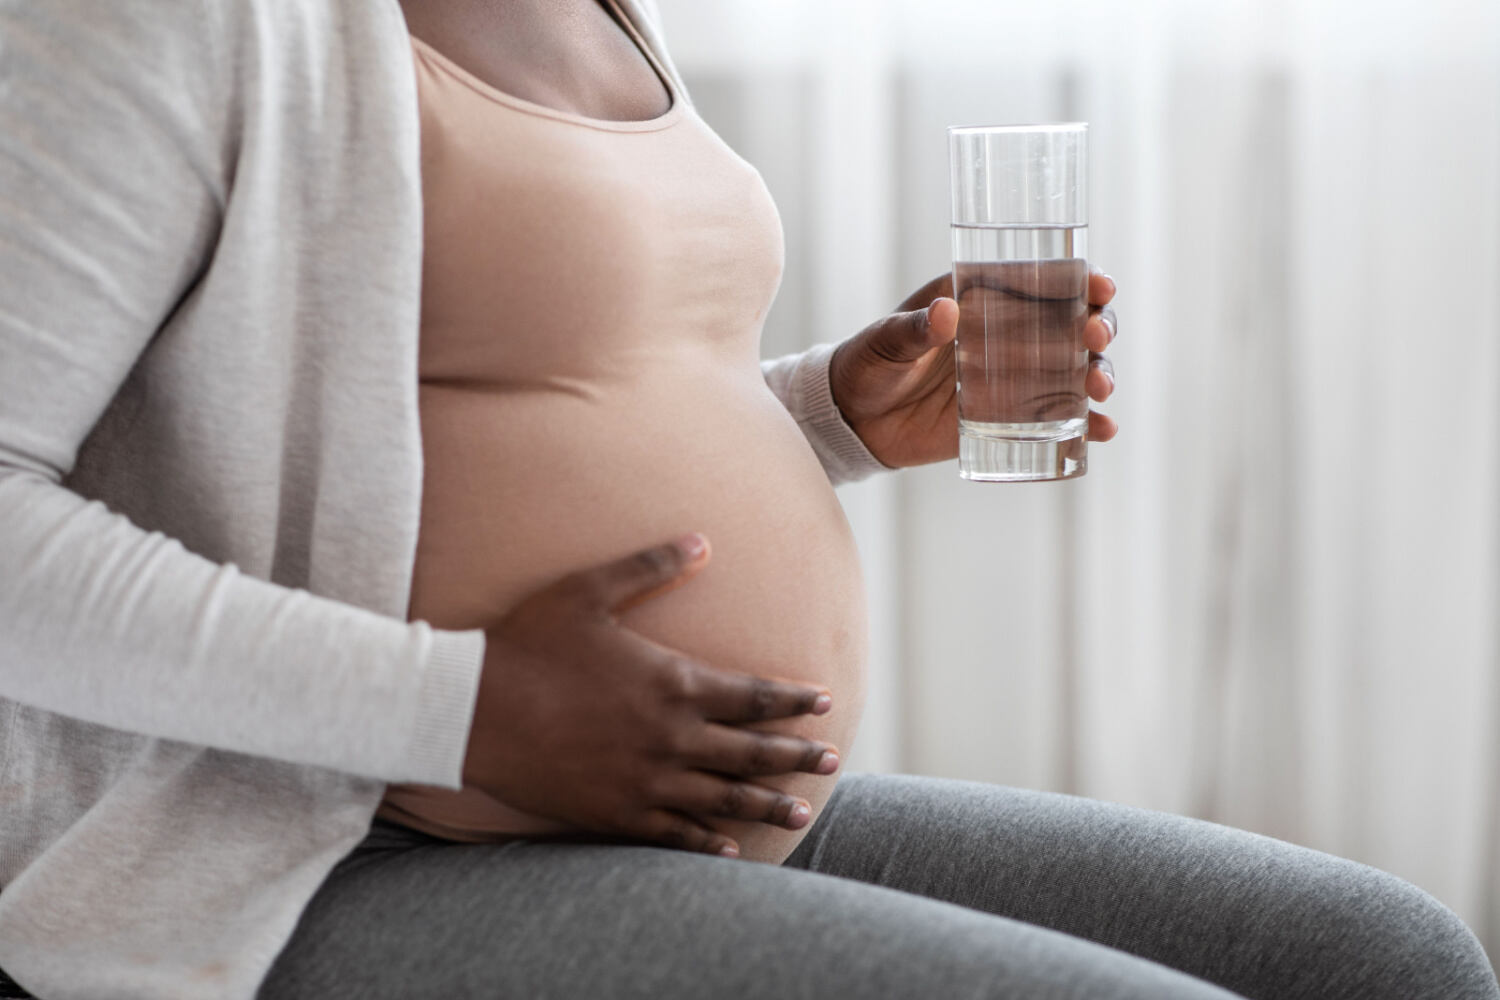 What causes high protein in urine during pregnancy?